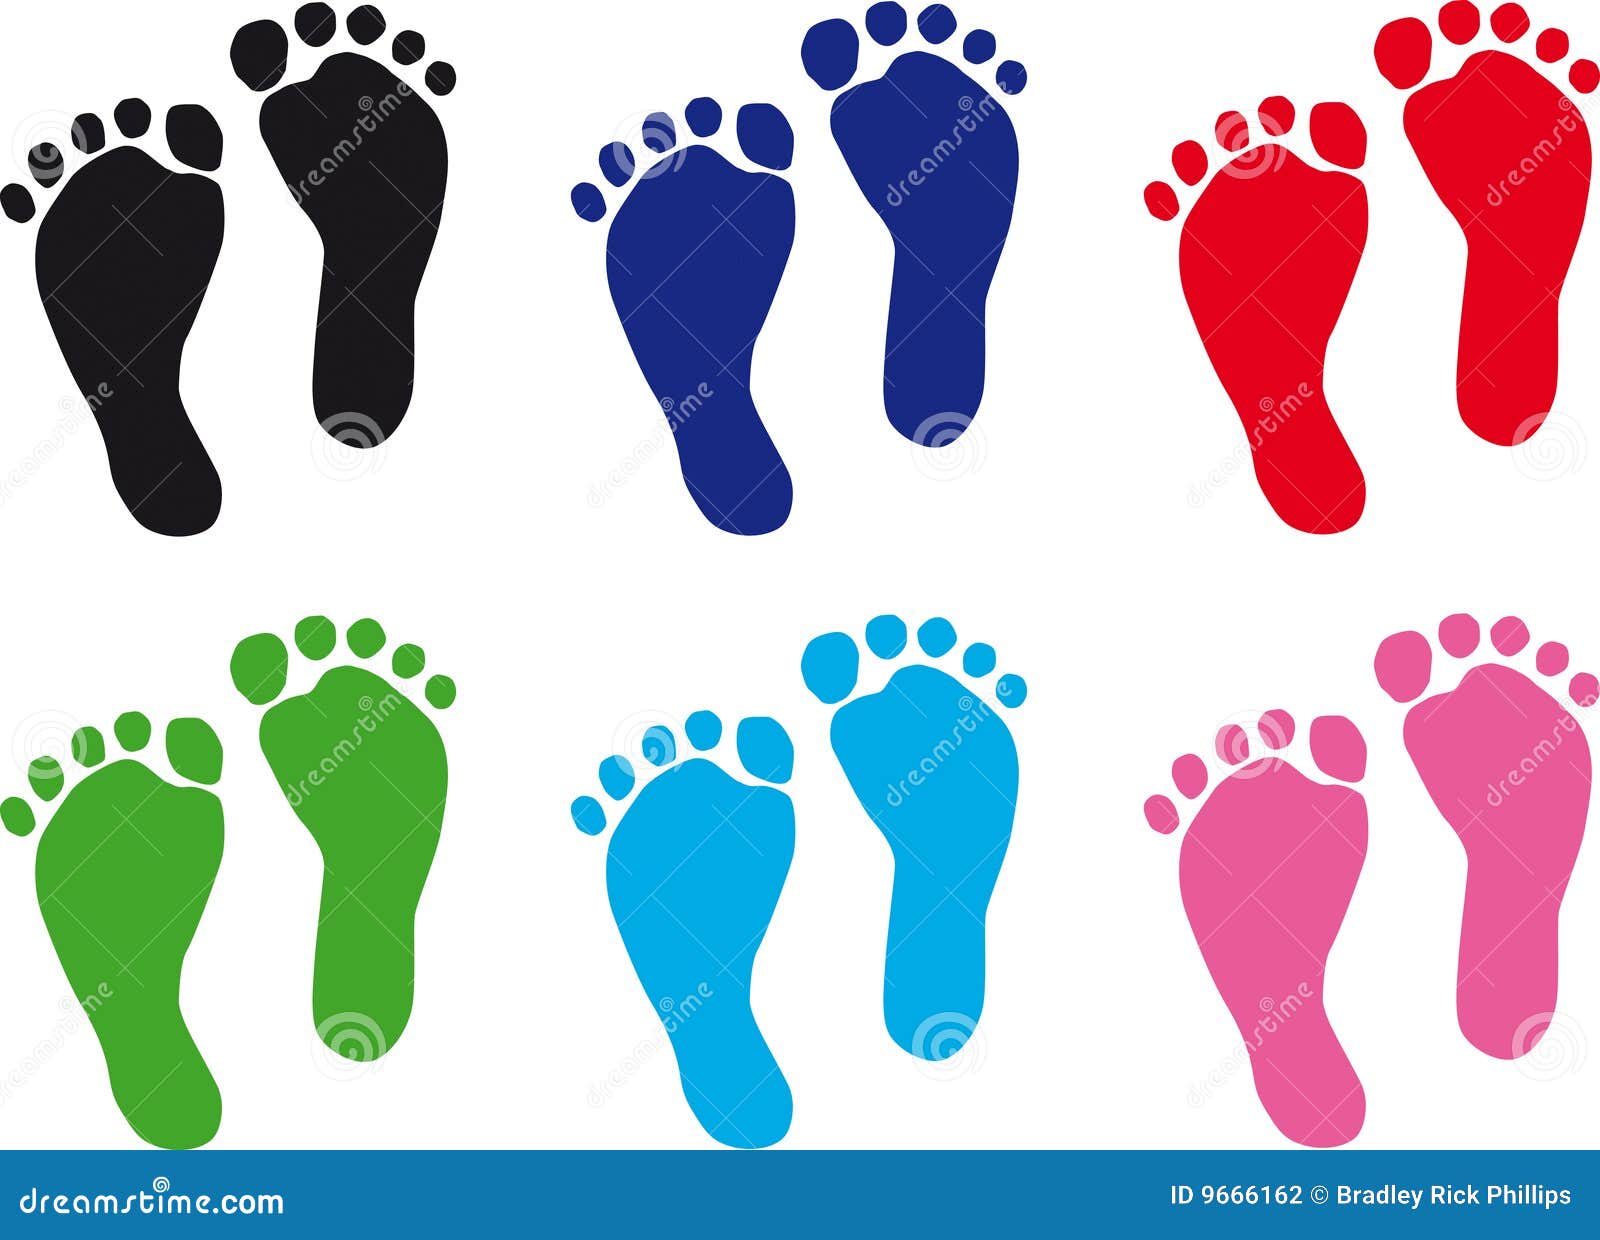 baby hands and feet clipart - photo #42